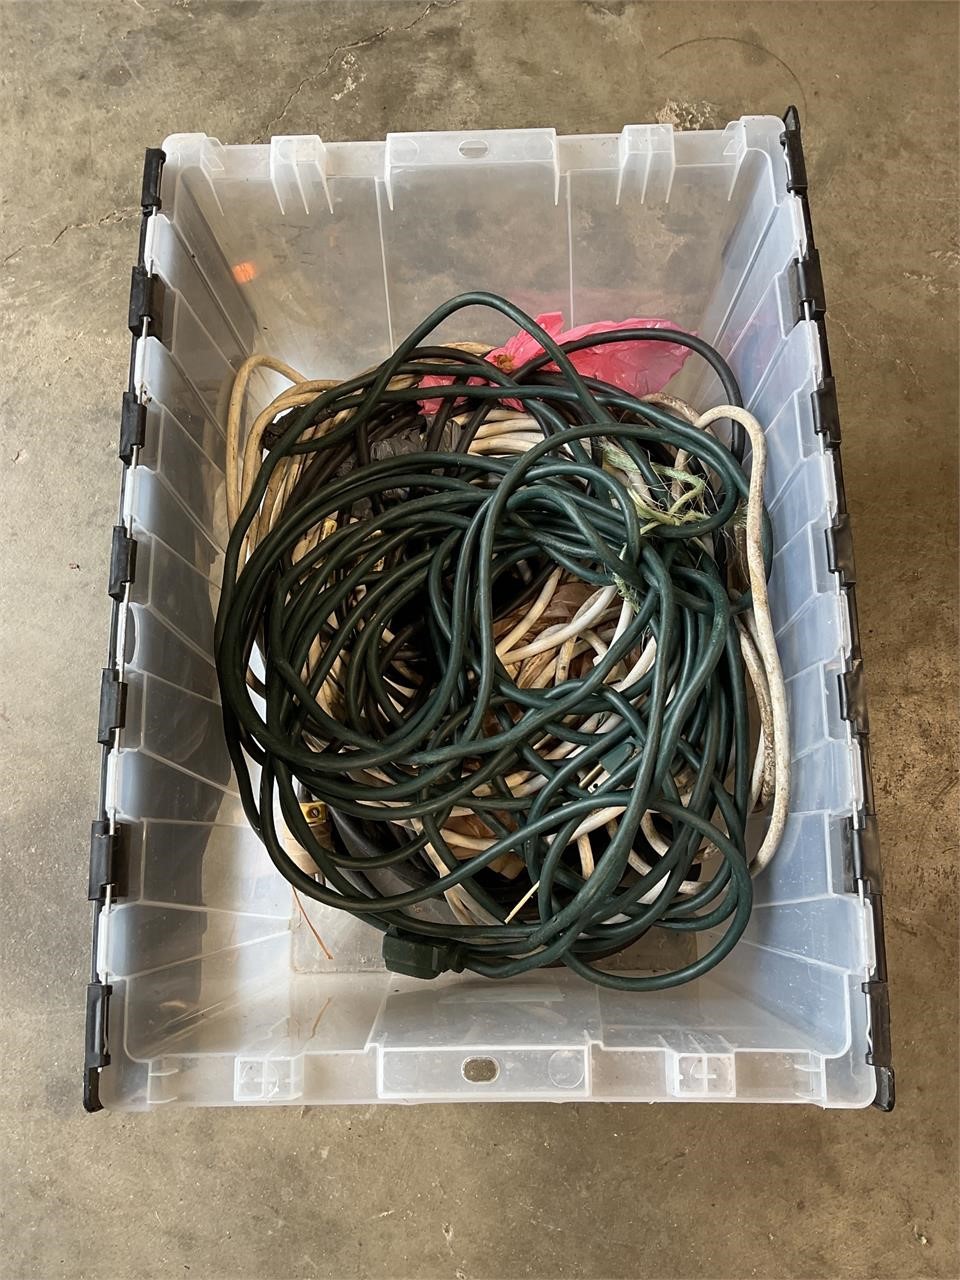 Tub of extension cords